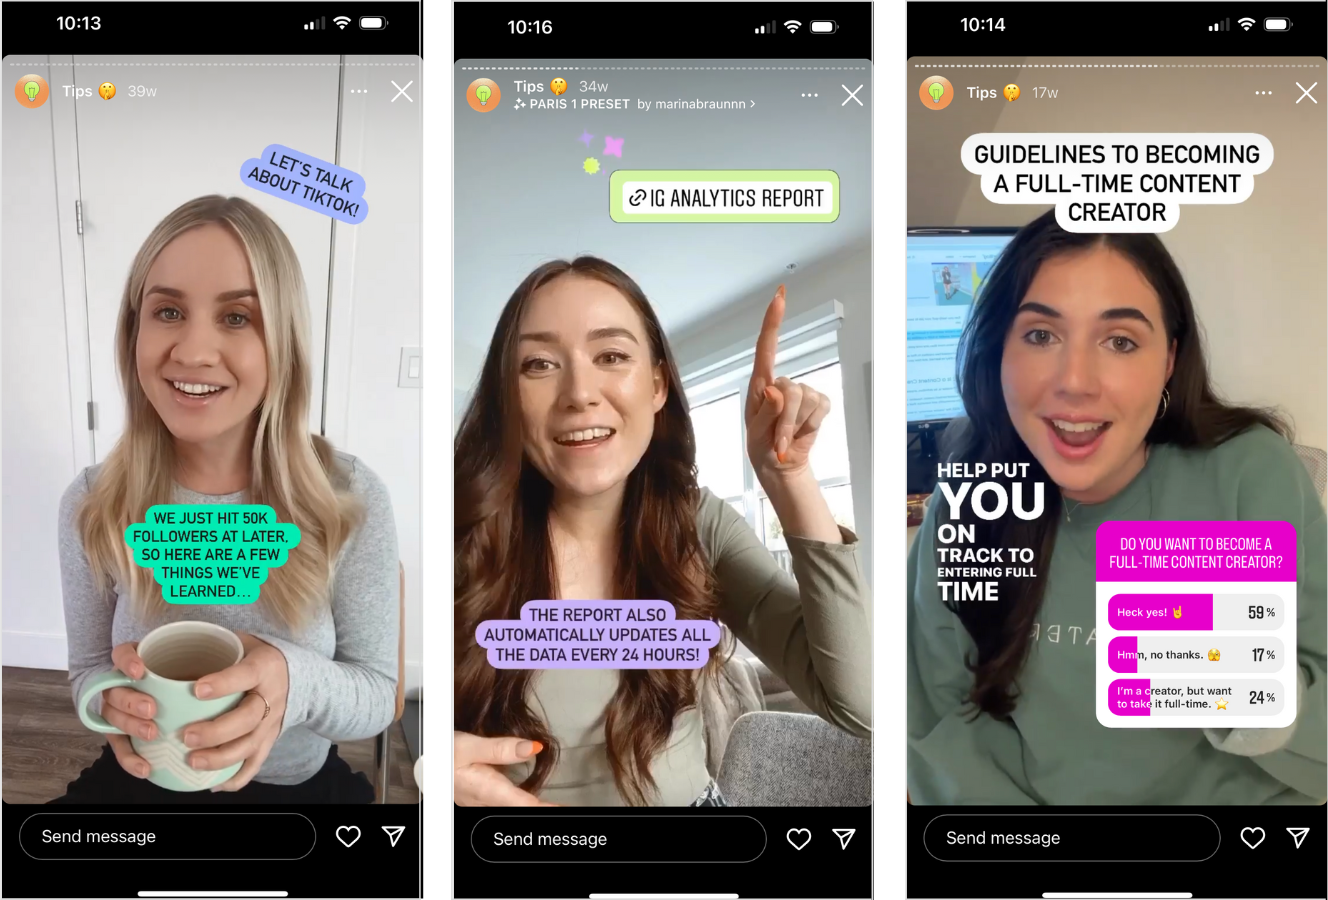 Instagram marketing trends - brand personalities showcasing Lindsay, Christine, and Chantal from Later on our Instagram Stories 